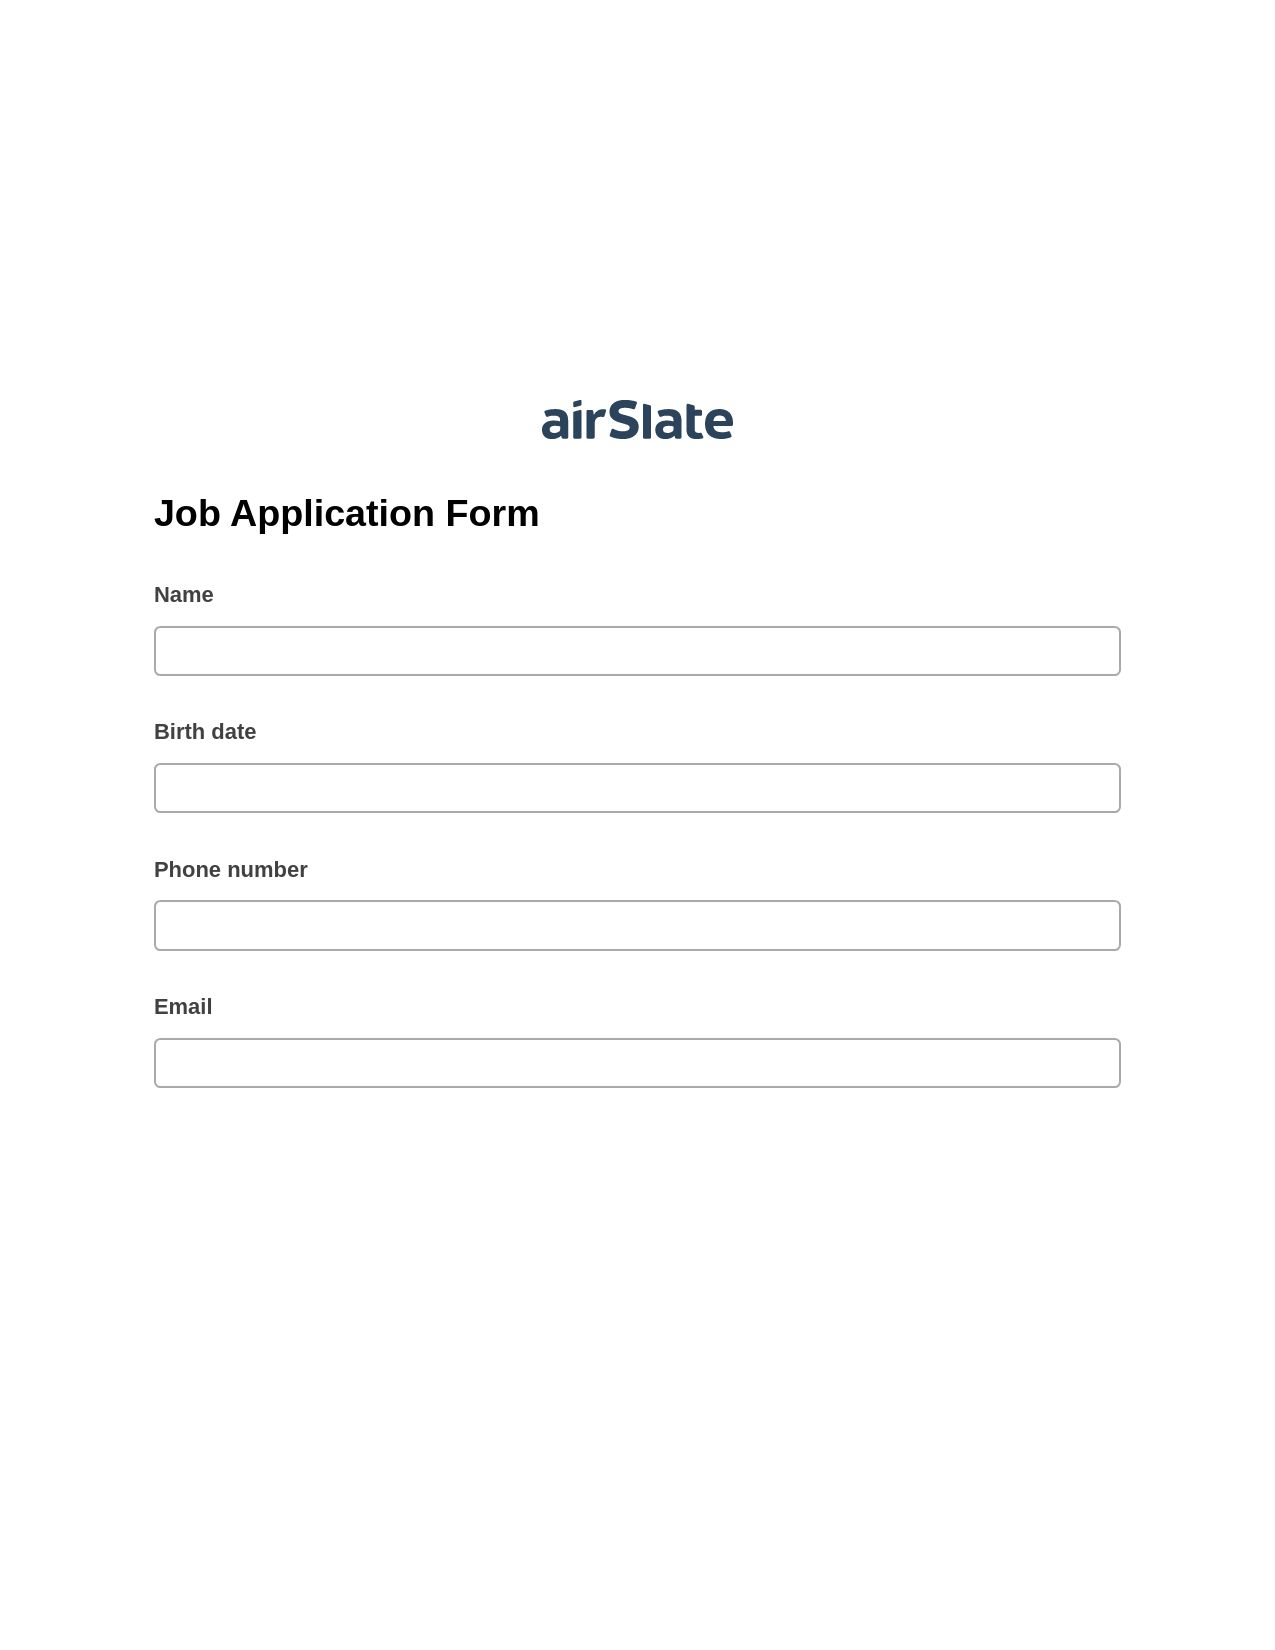 Job Application Form Pre-fill from Excel Spreadsheet Bot, Update MS Dynamics 365 Record Bot, Export to Salesforce Bot